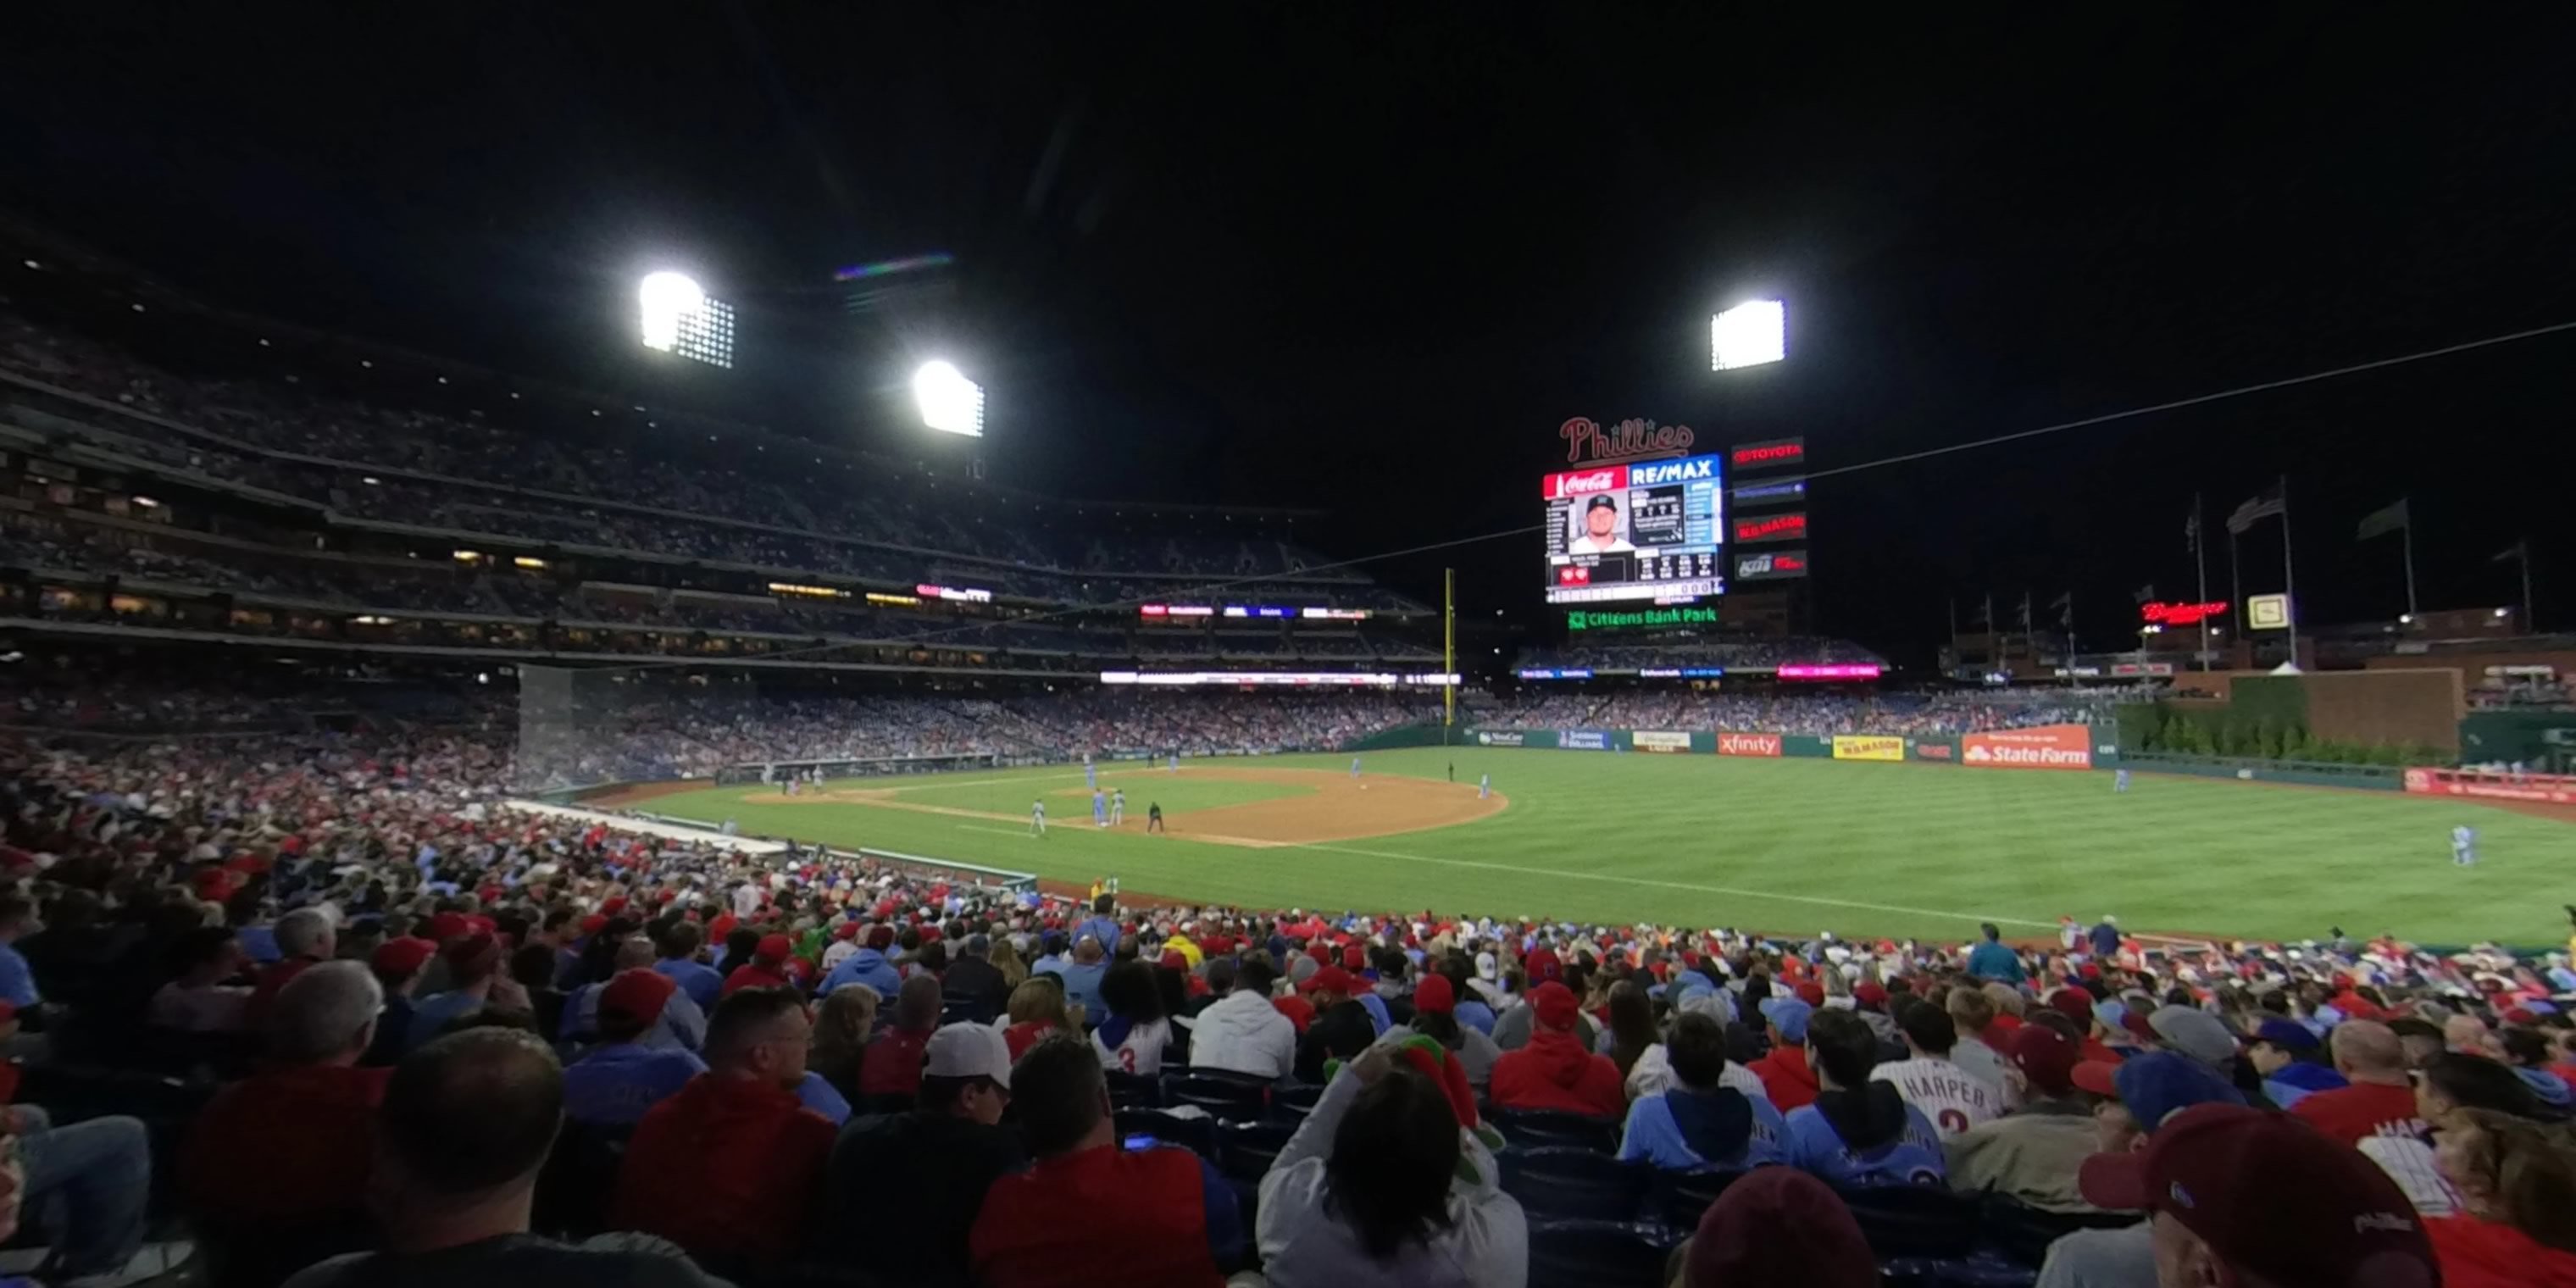 section 112 panoramic seat view  for baseball - citizens bank park